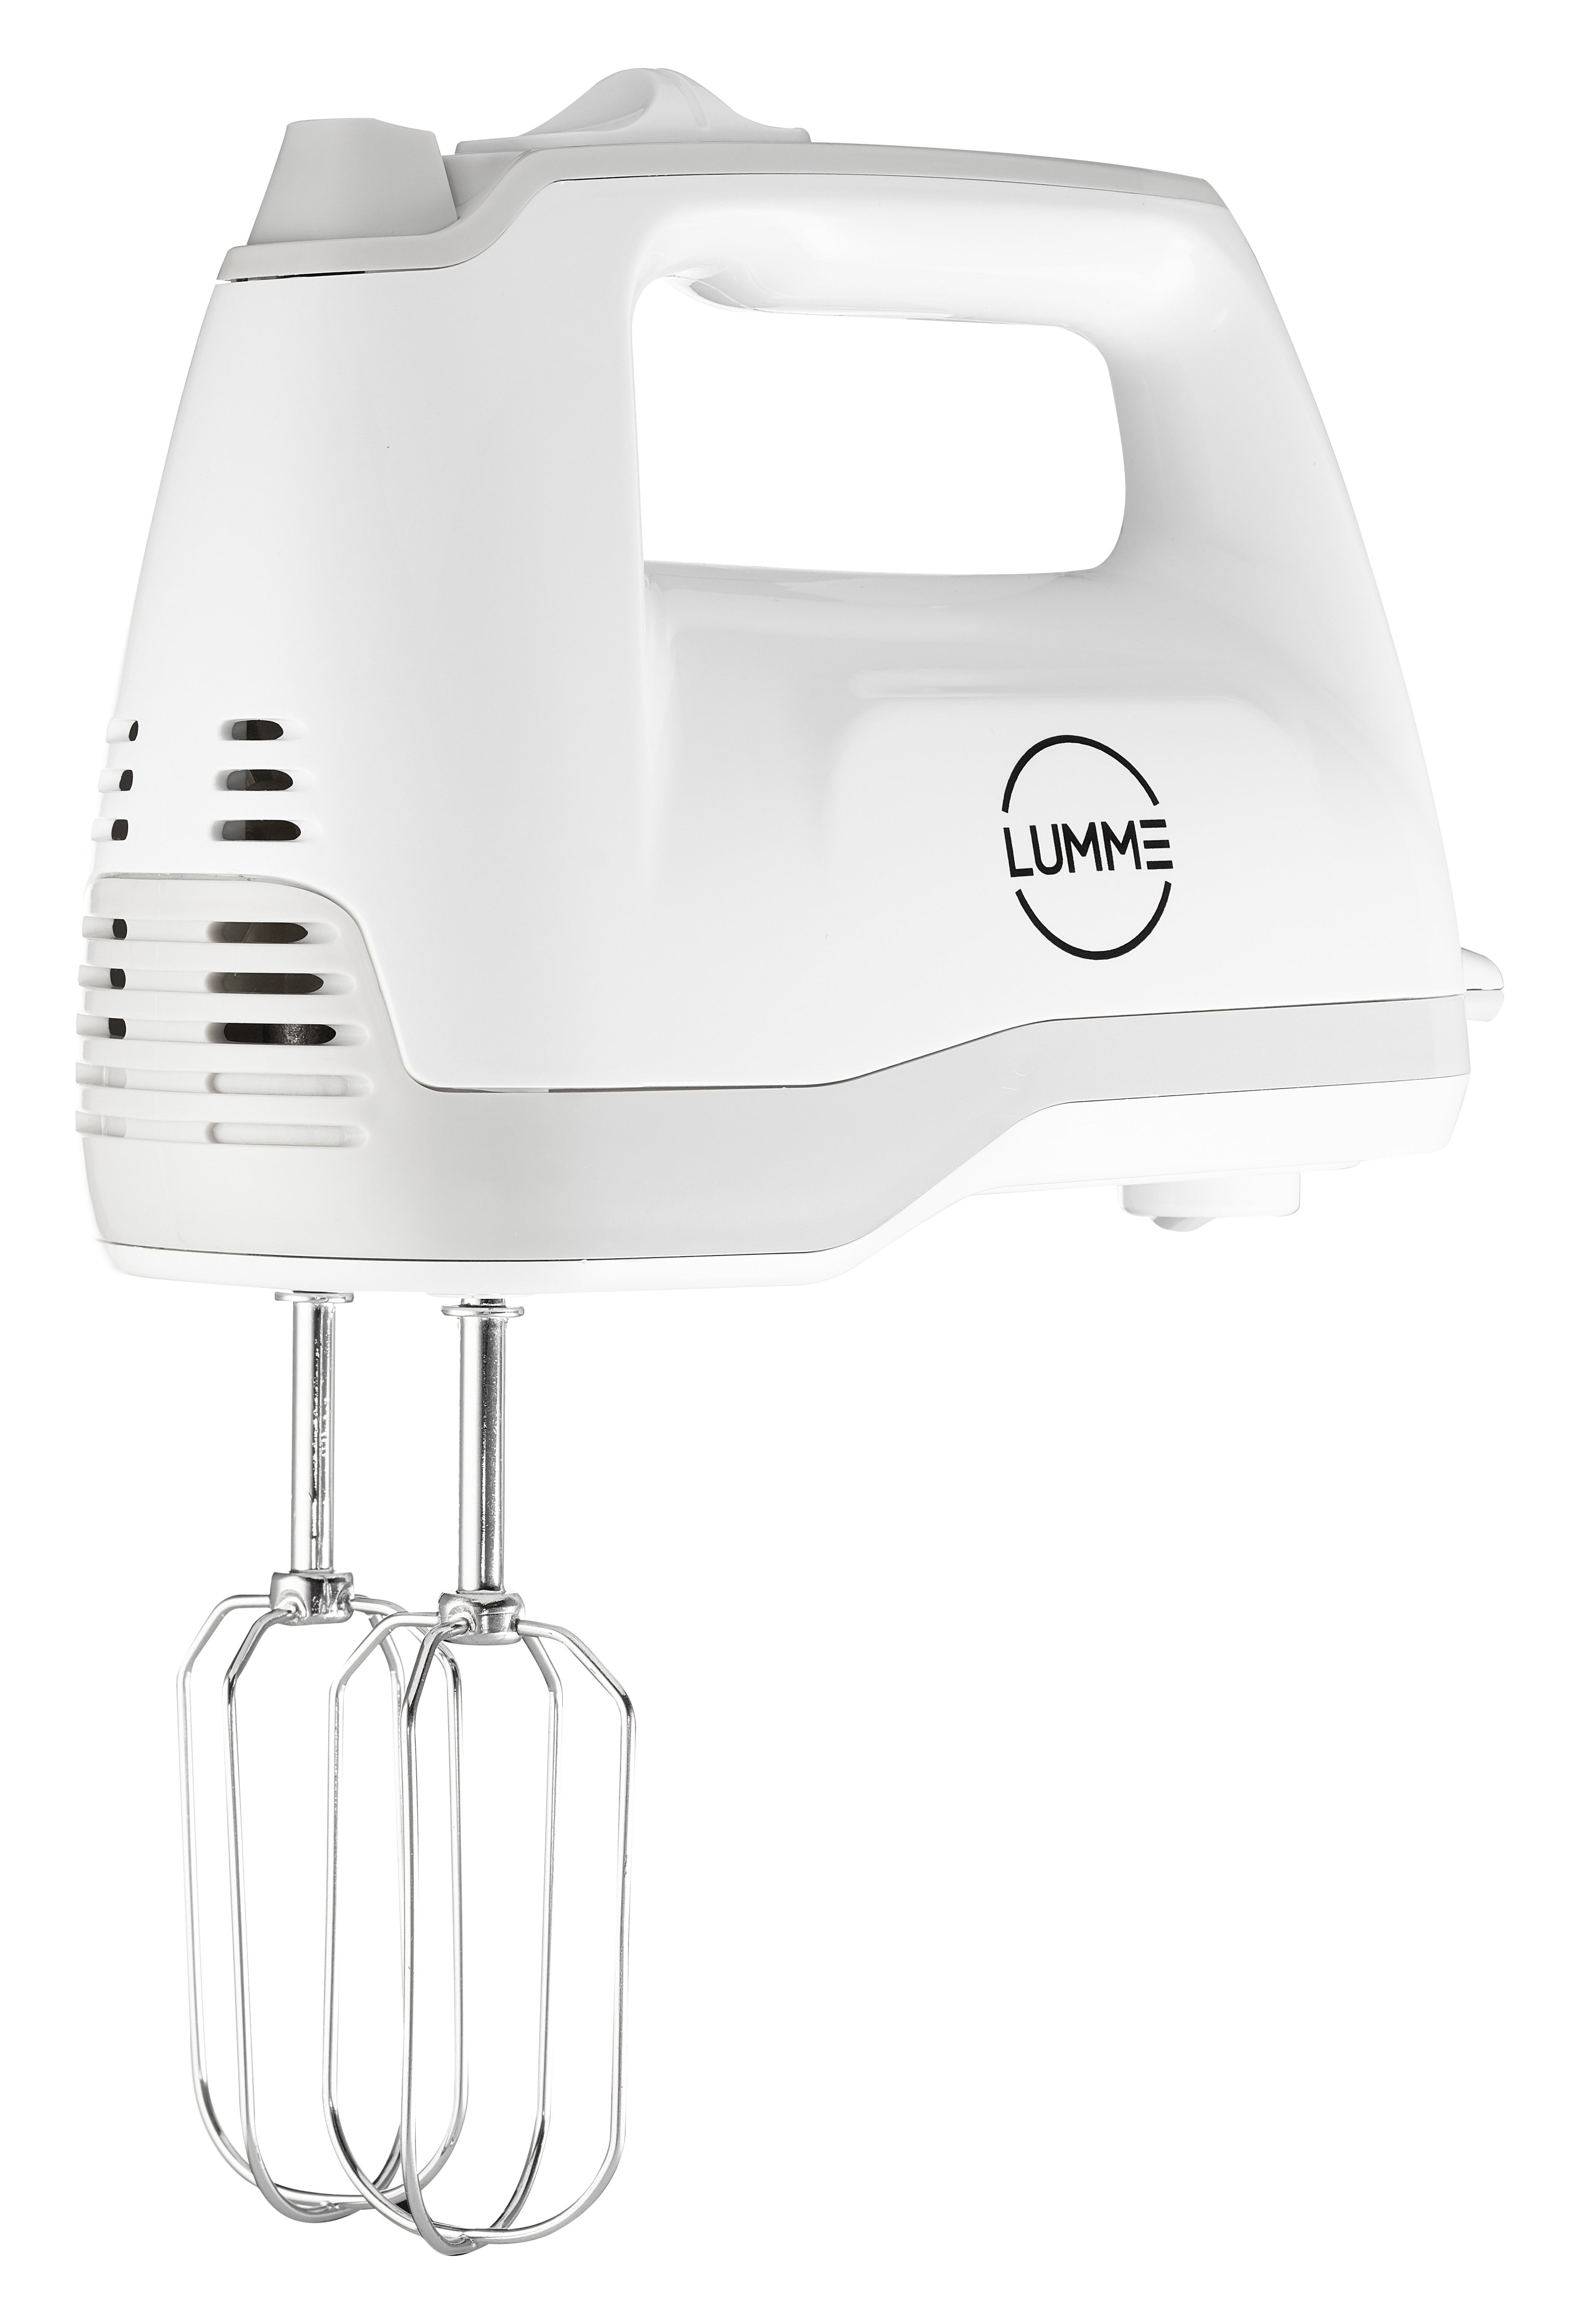  Electric Hand Mixer, Handheld Mixers for Kitchen, With